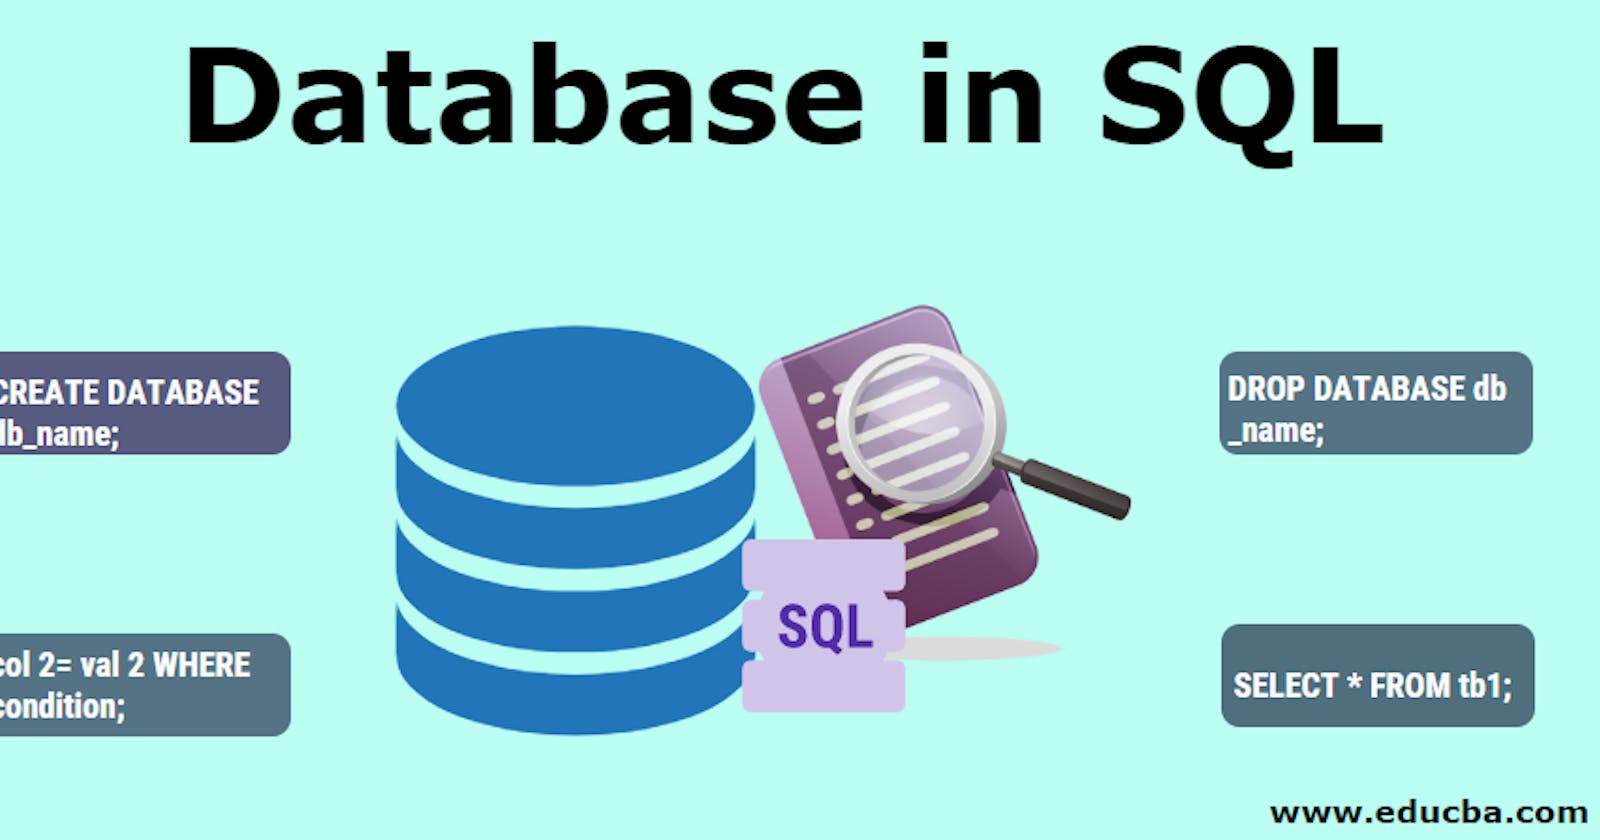 Introduction to Databases - SQL